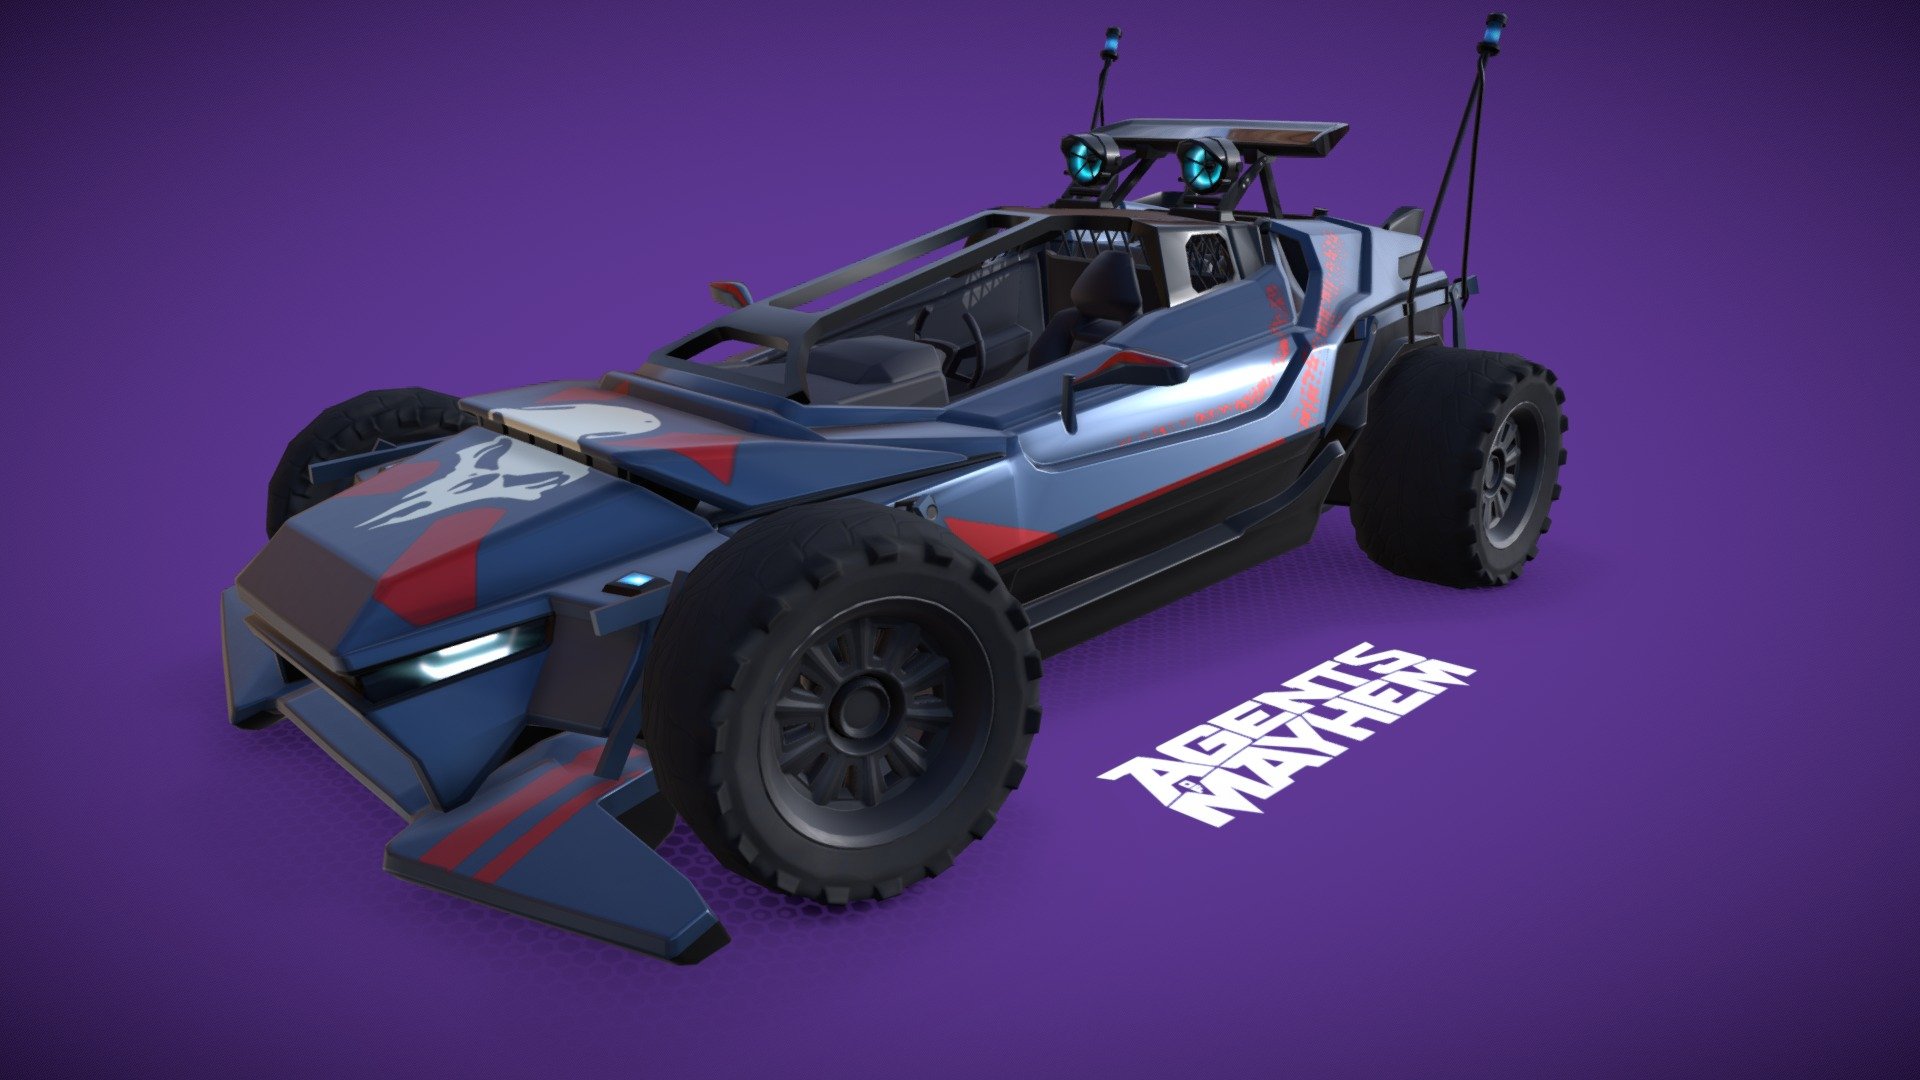 Agent Fortune's Mongoose vehicle skin modeled for the Agents of Mayhem game.

Used Fortune character ref as inspiration along with Fortune's pirate theme 3d model